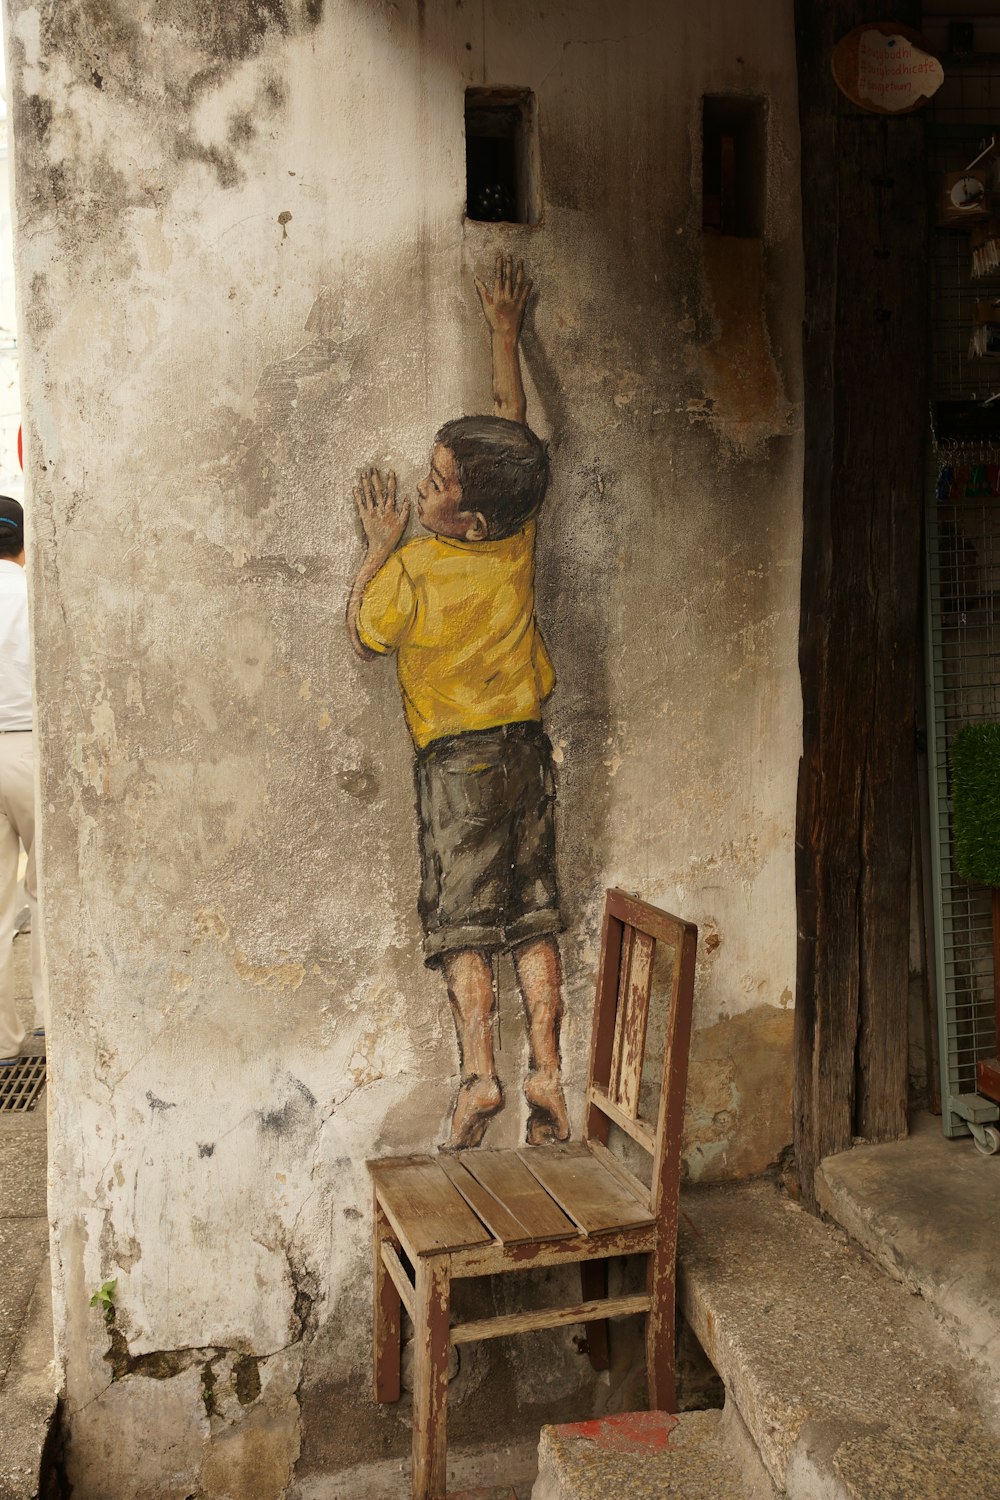 boy standing on wooden chair reaching hole on concrete wall painting